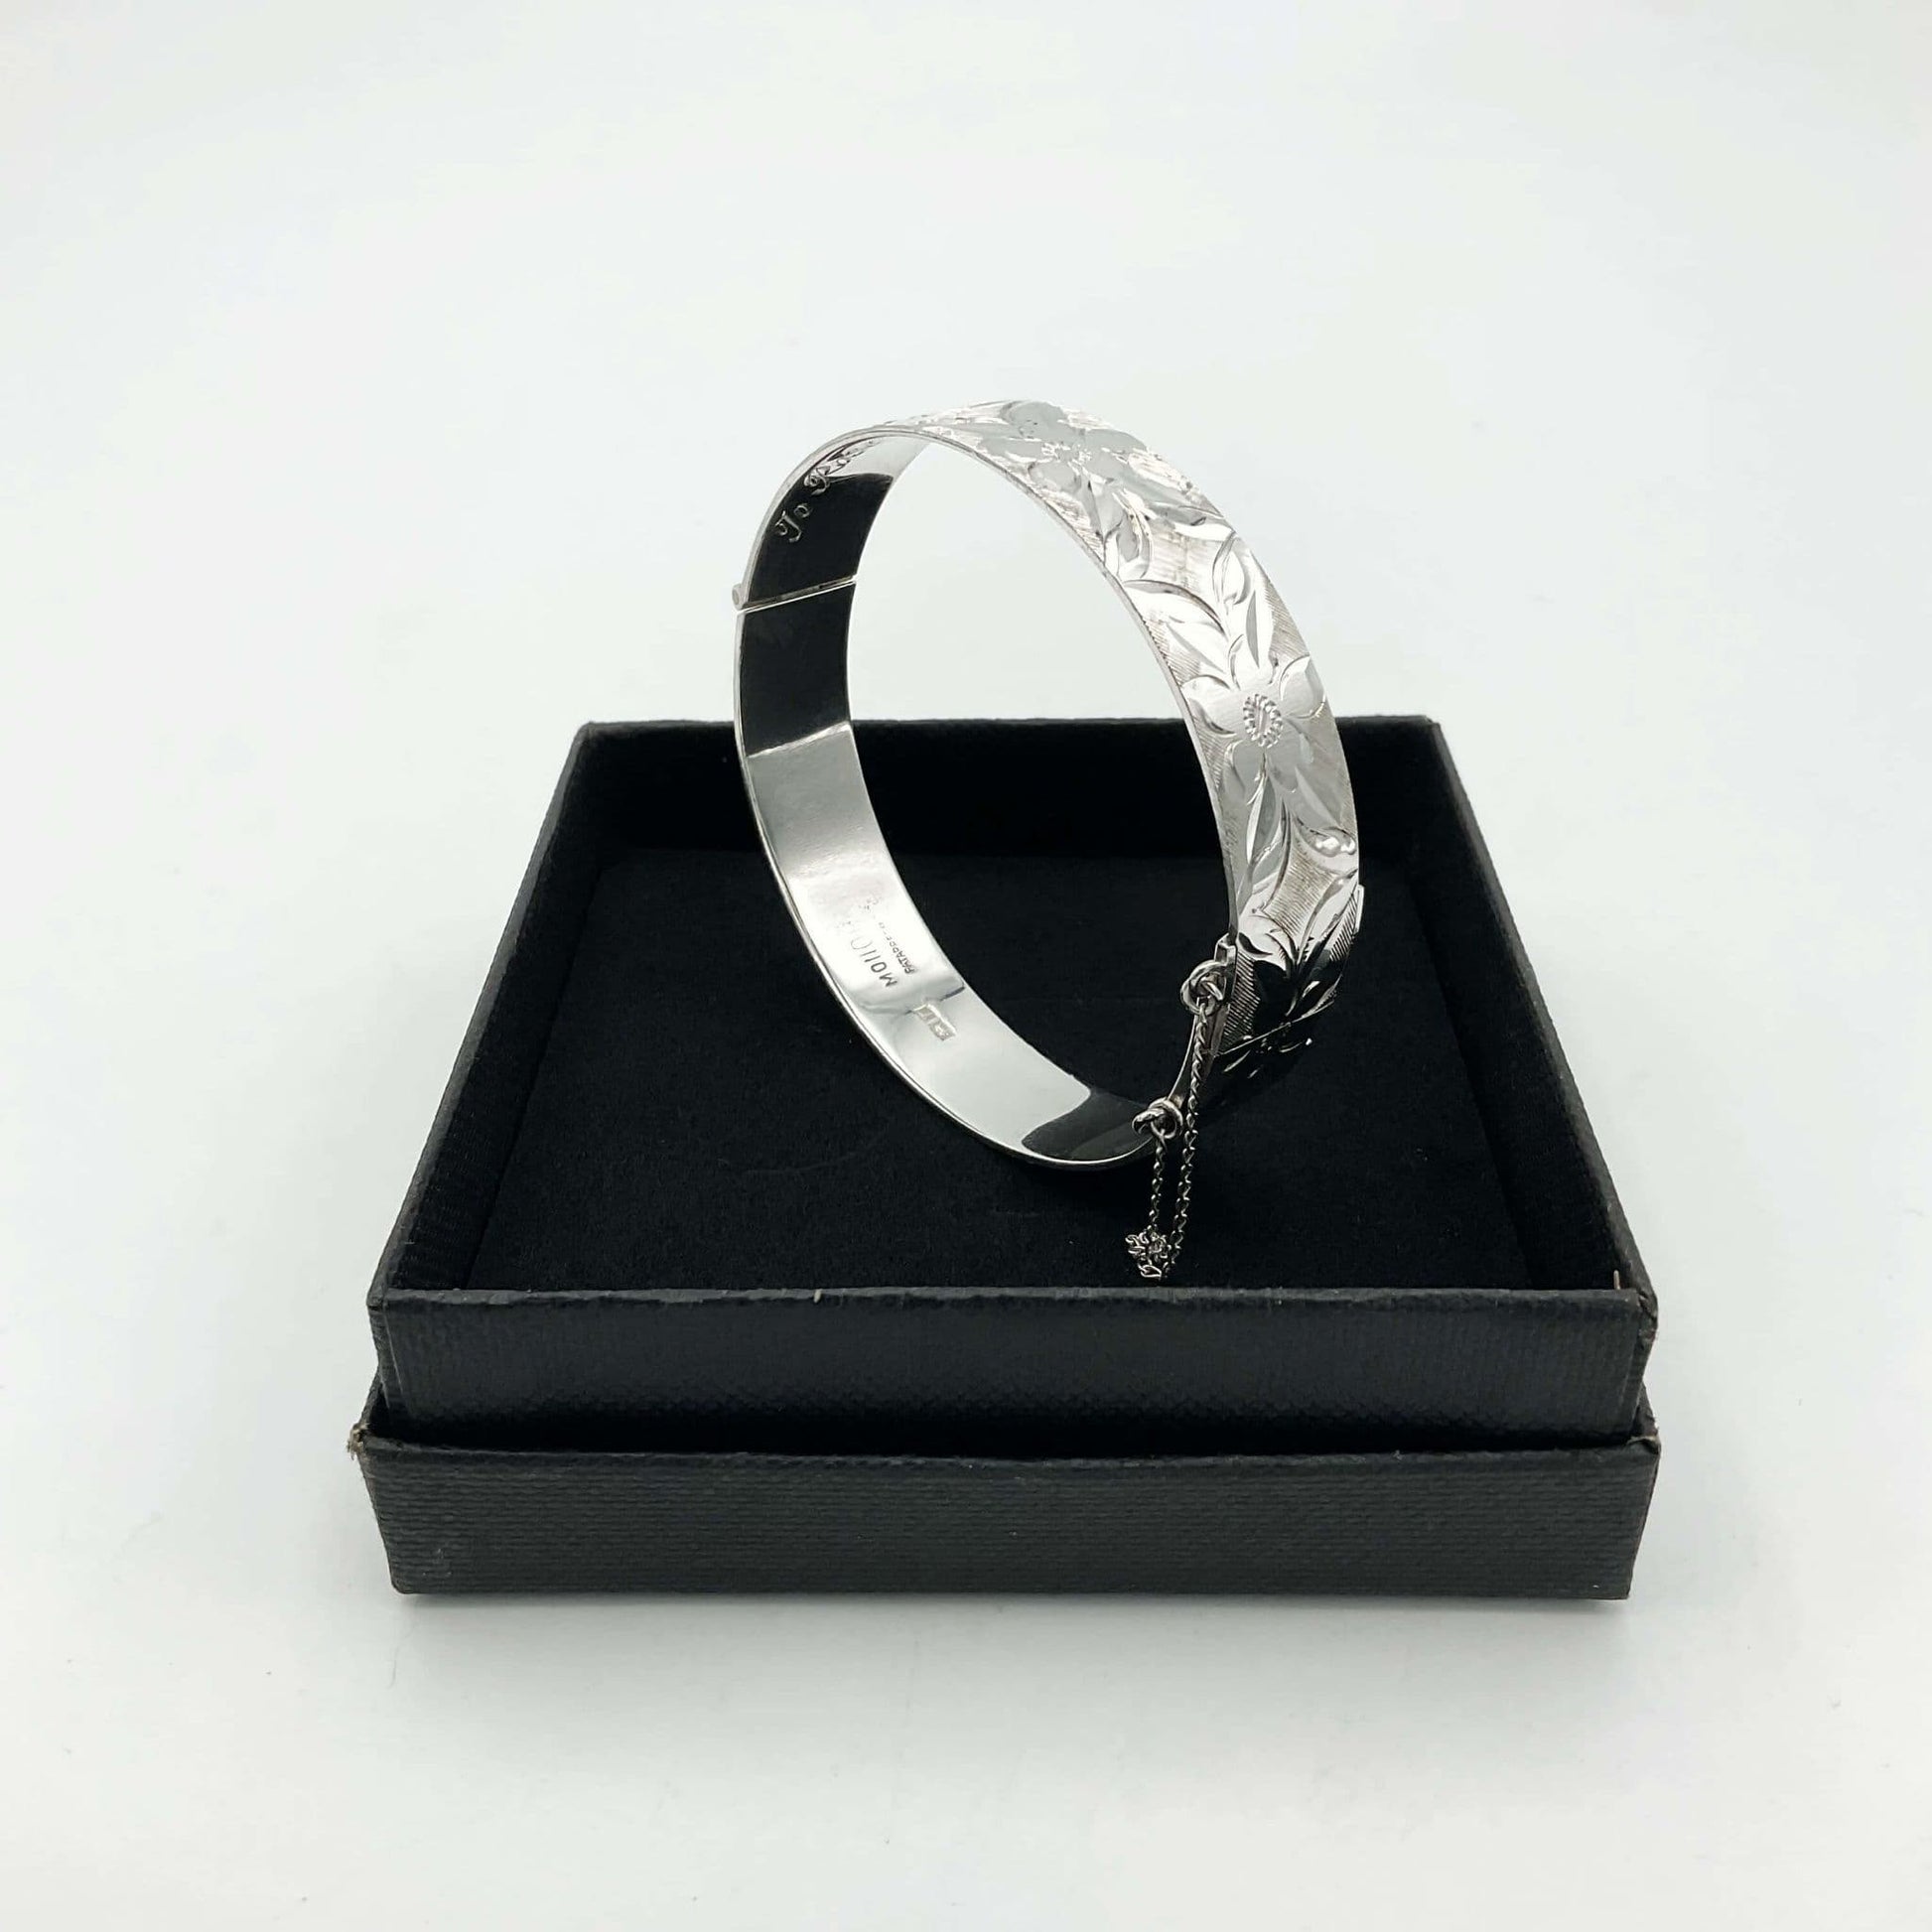 Silver bracelet with engraved flowers sitting inside a black box